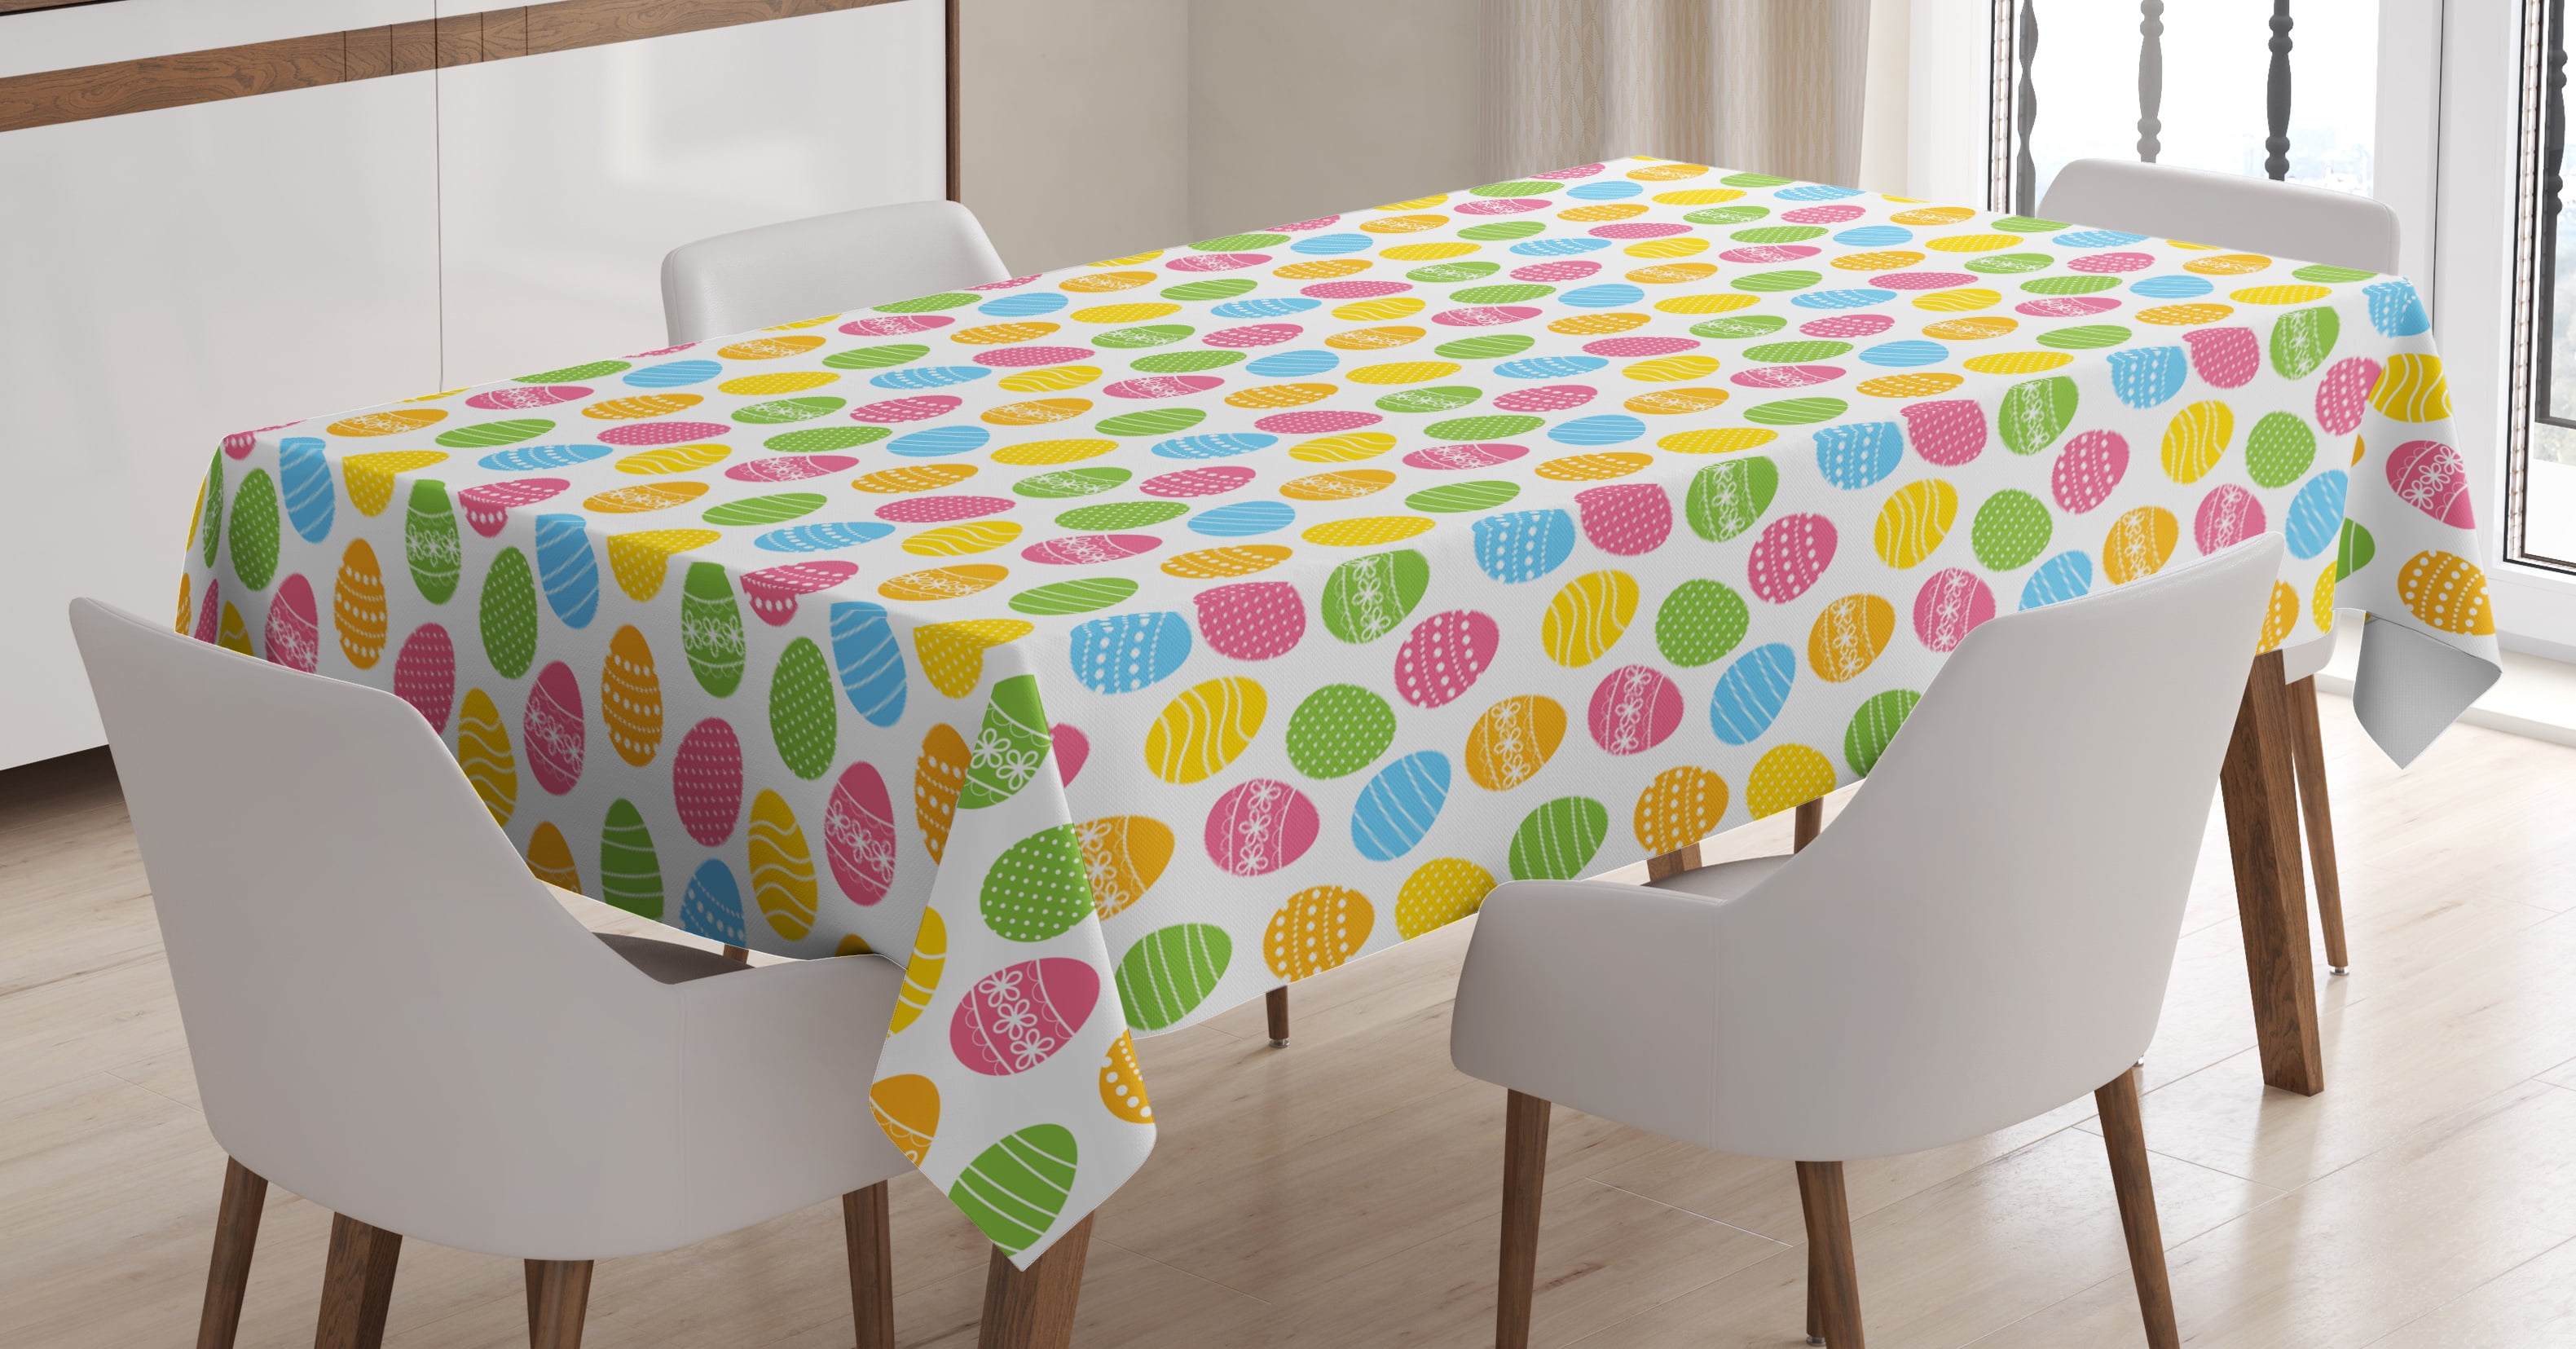 Easter Tablecloth Greeting the Colorful and Fun Spring Season April 